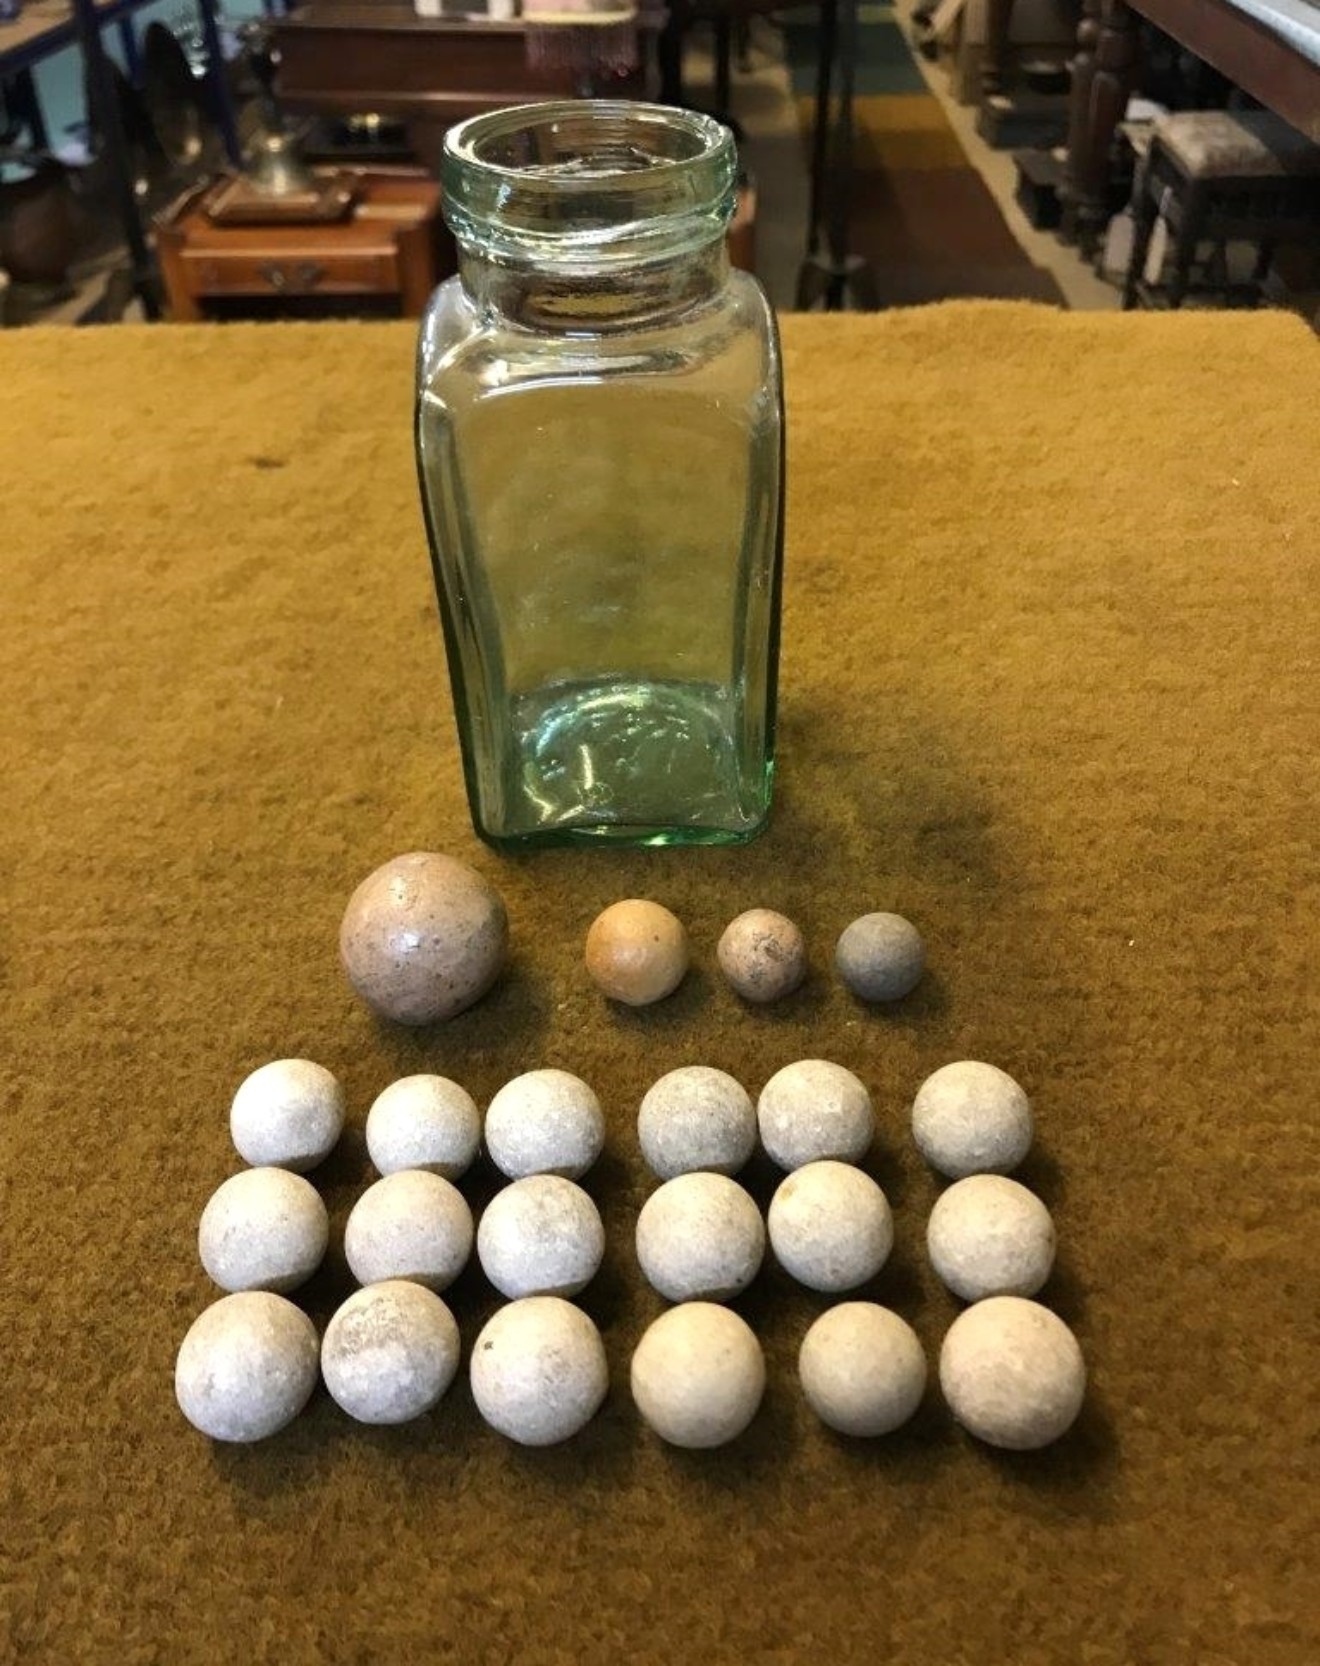 Antique Clay Marbles Set